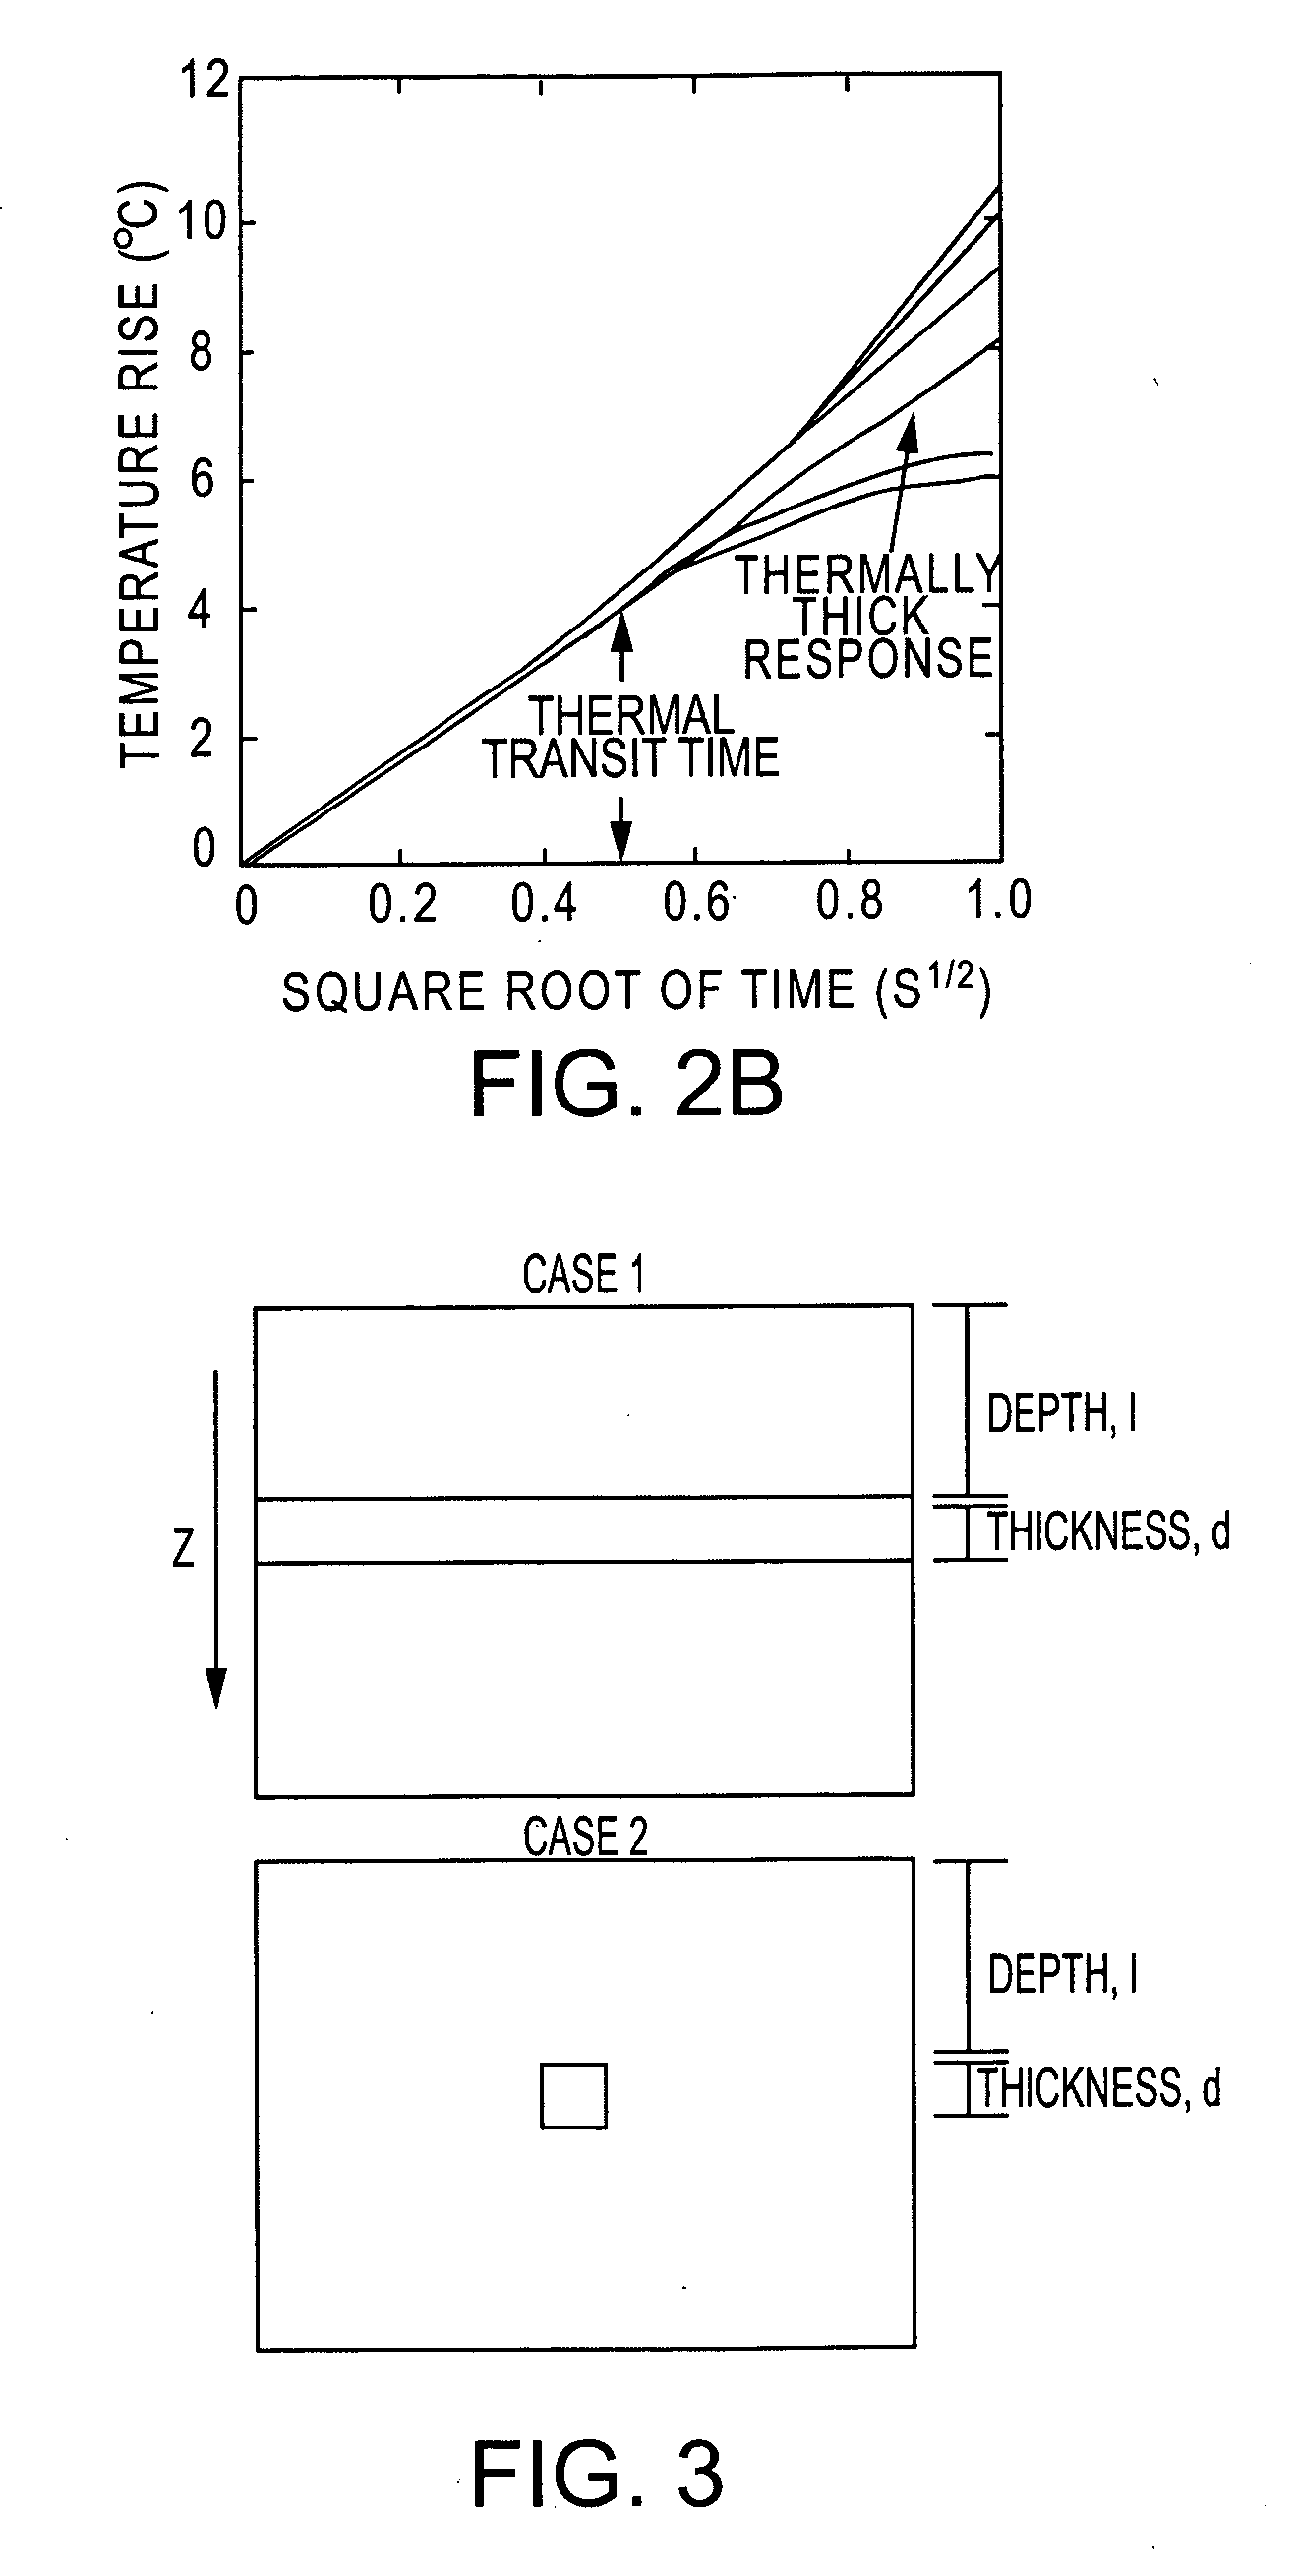 Thermal-based methods for nondestructive evaluation